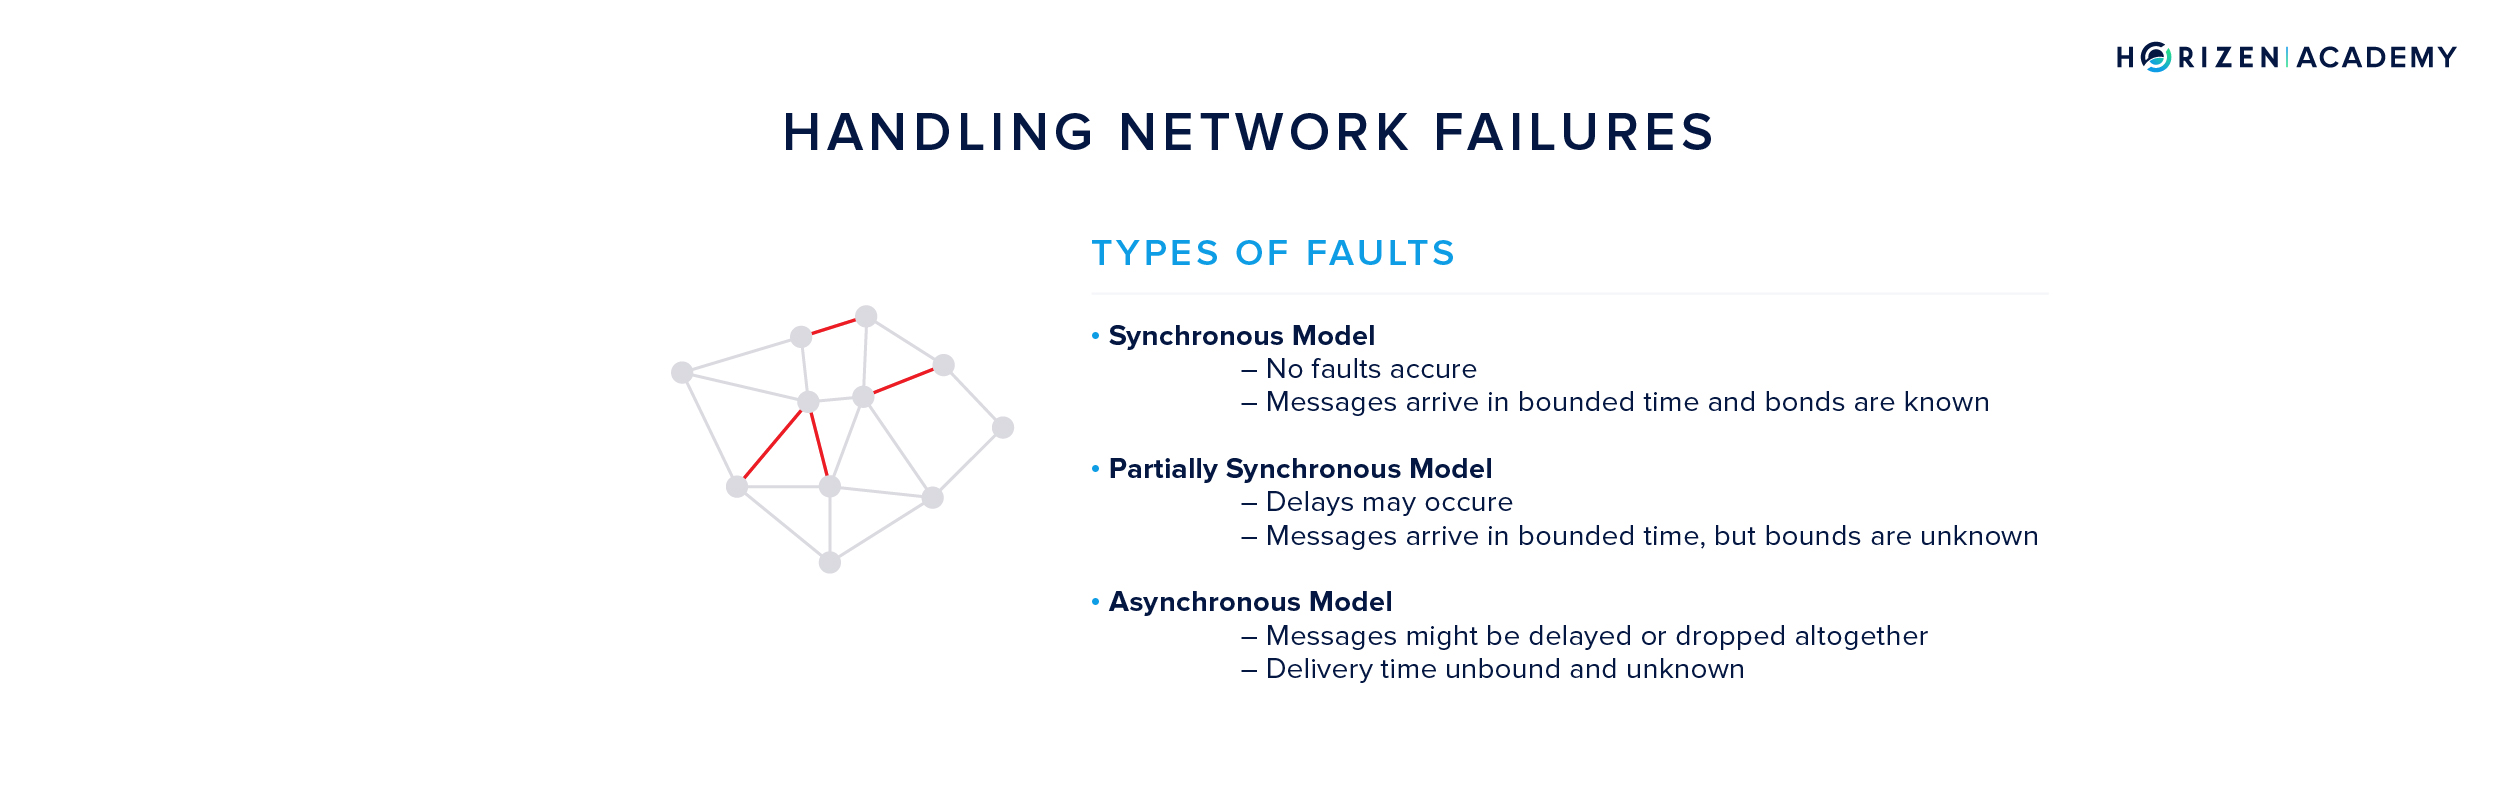 Network Failures in a Distributed Peer-2-Peer (P2P) Network